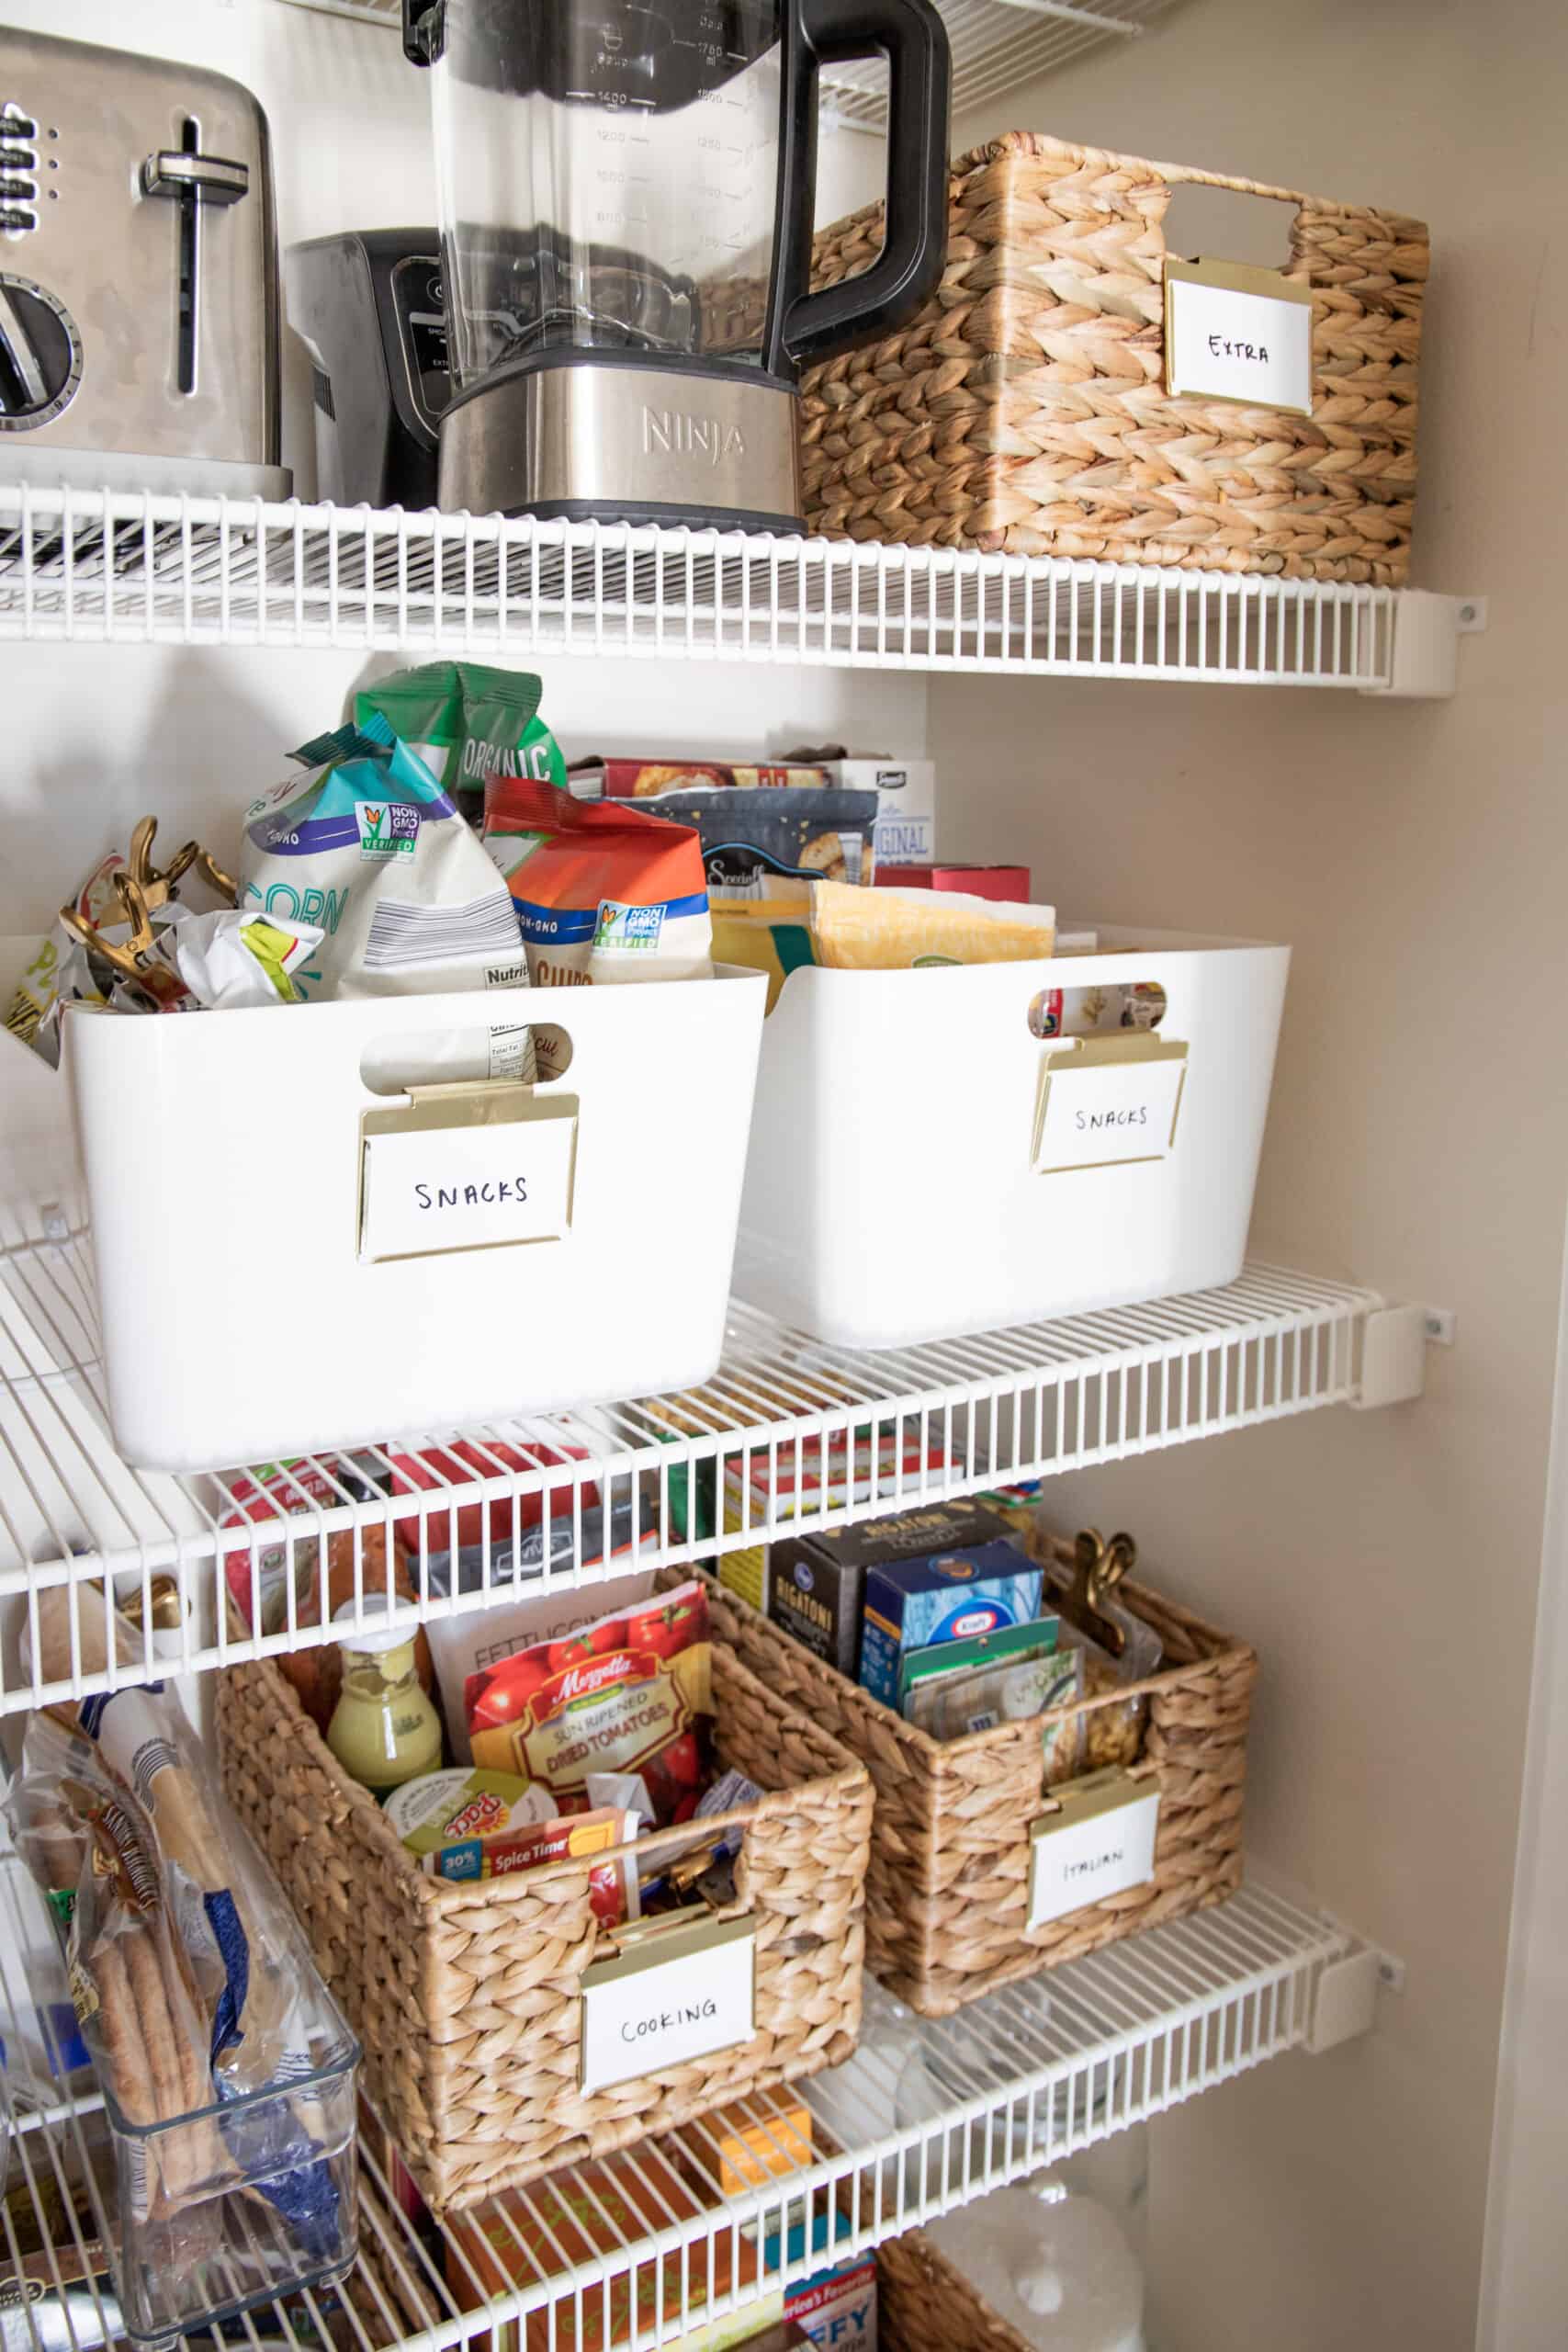 Pantry Organization Ideas: Food Storage Containers and Wire Baskets